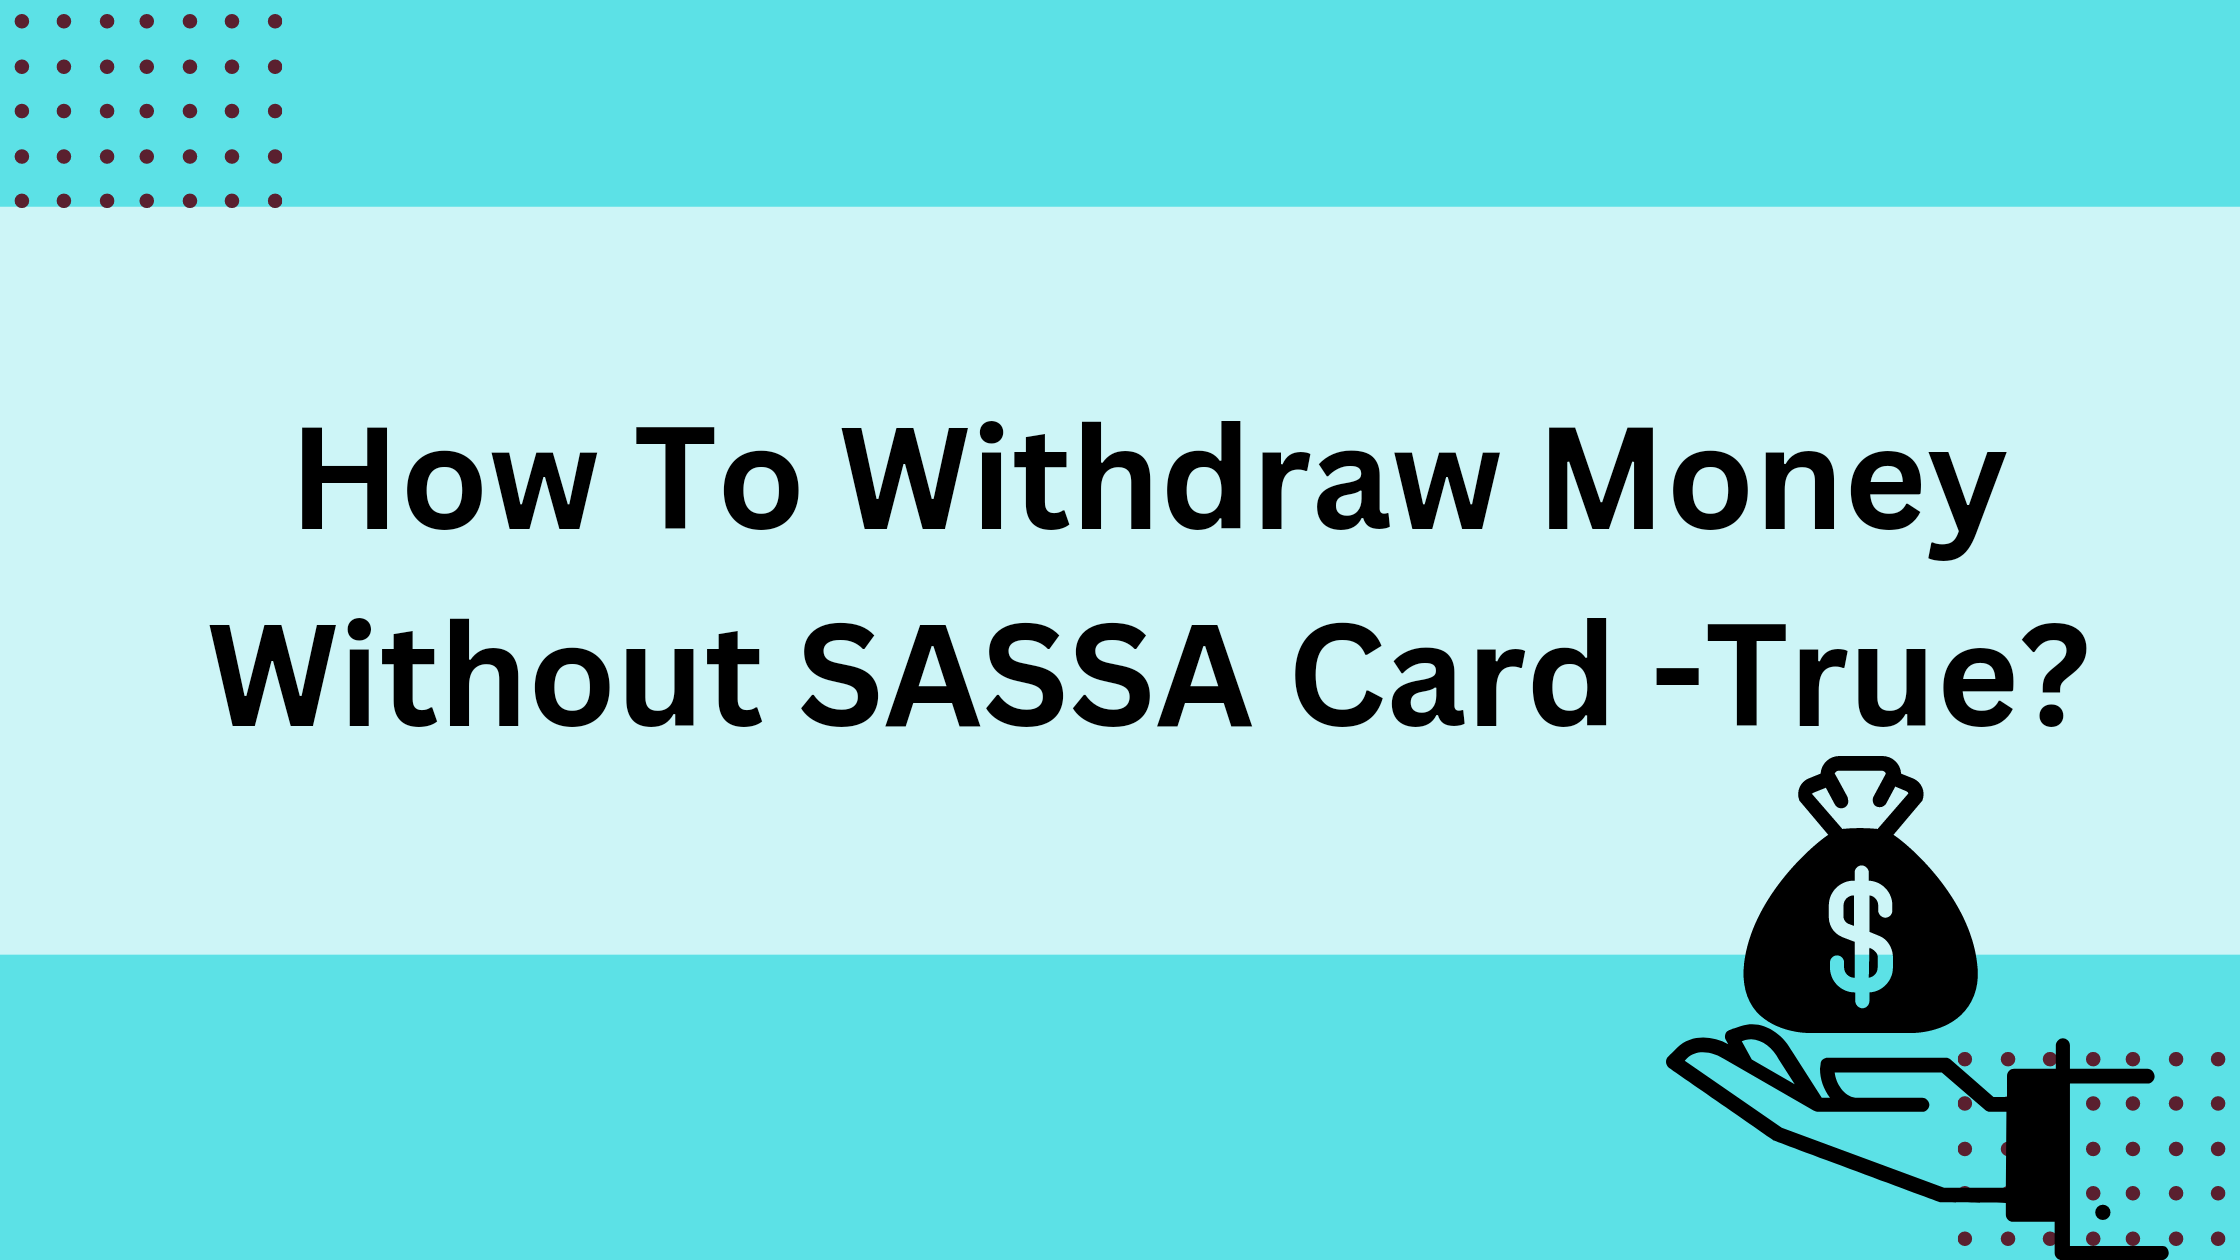 How To Withdraw Money Without SASSA Card -True?